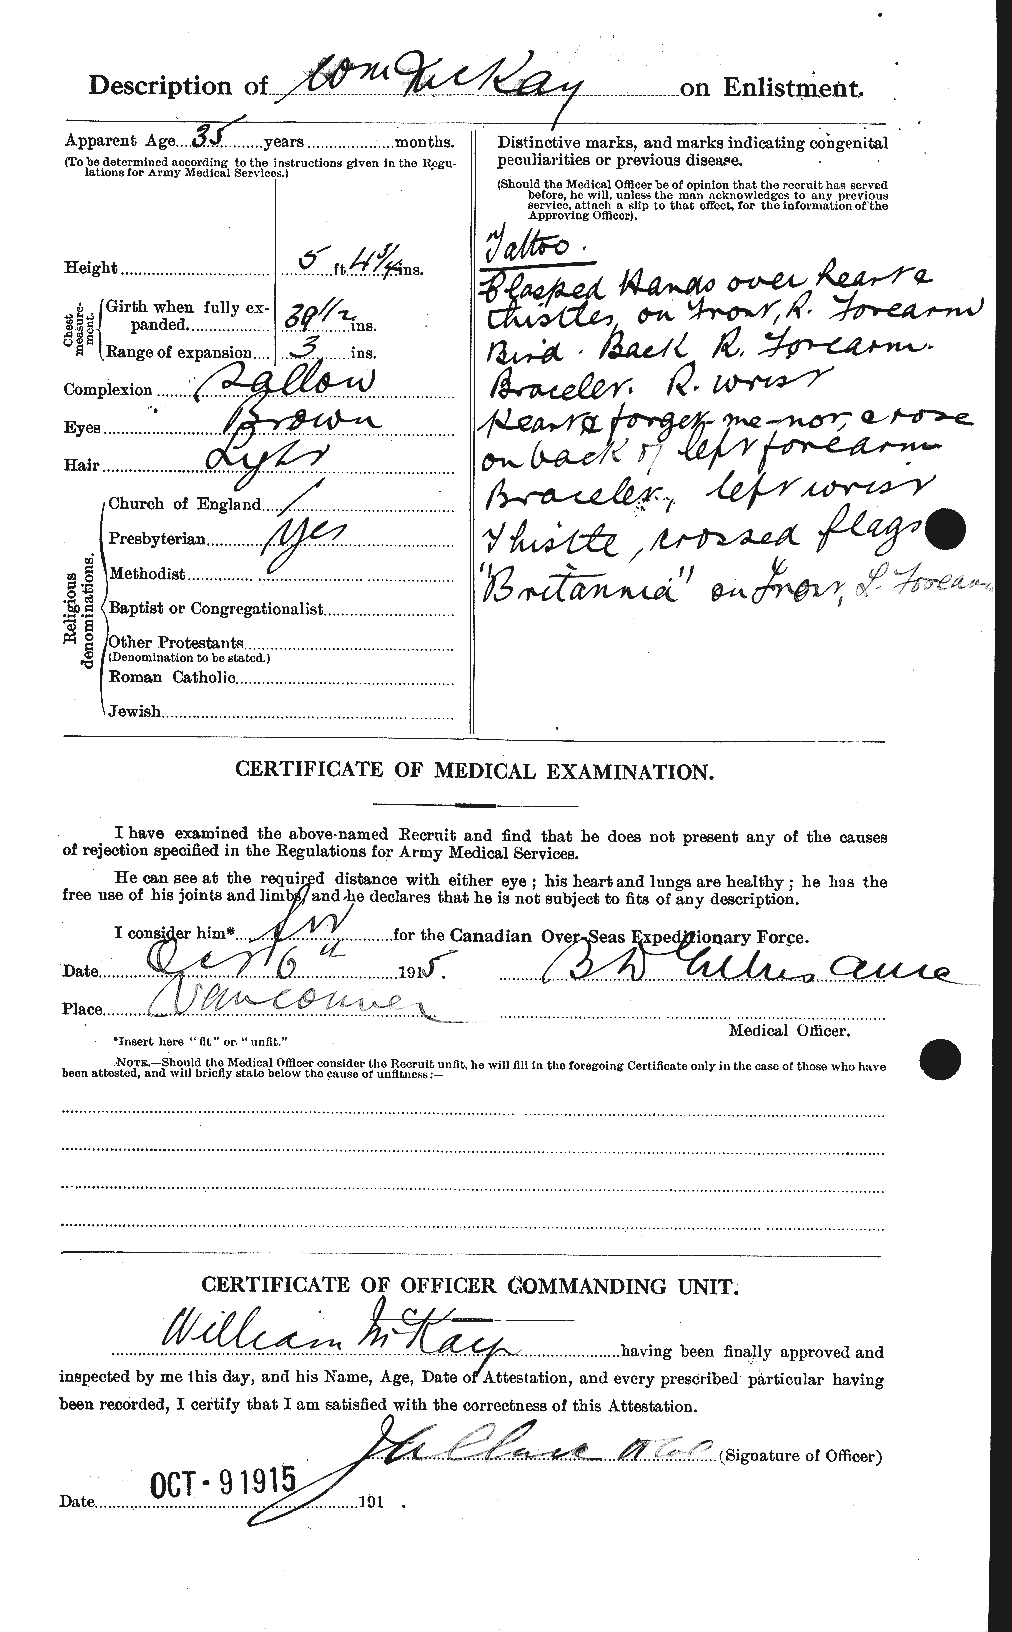 Personnel Records of the First World War - CEF 530246b